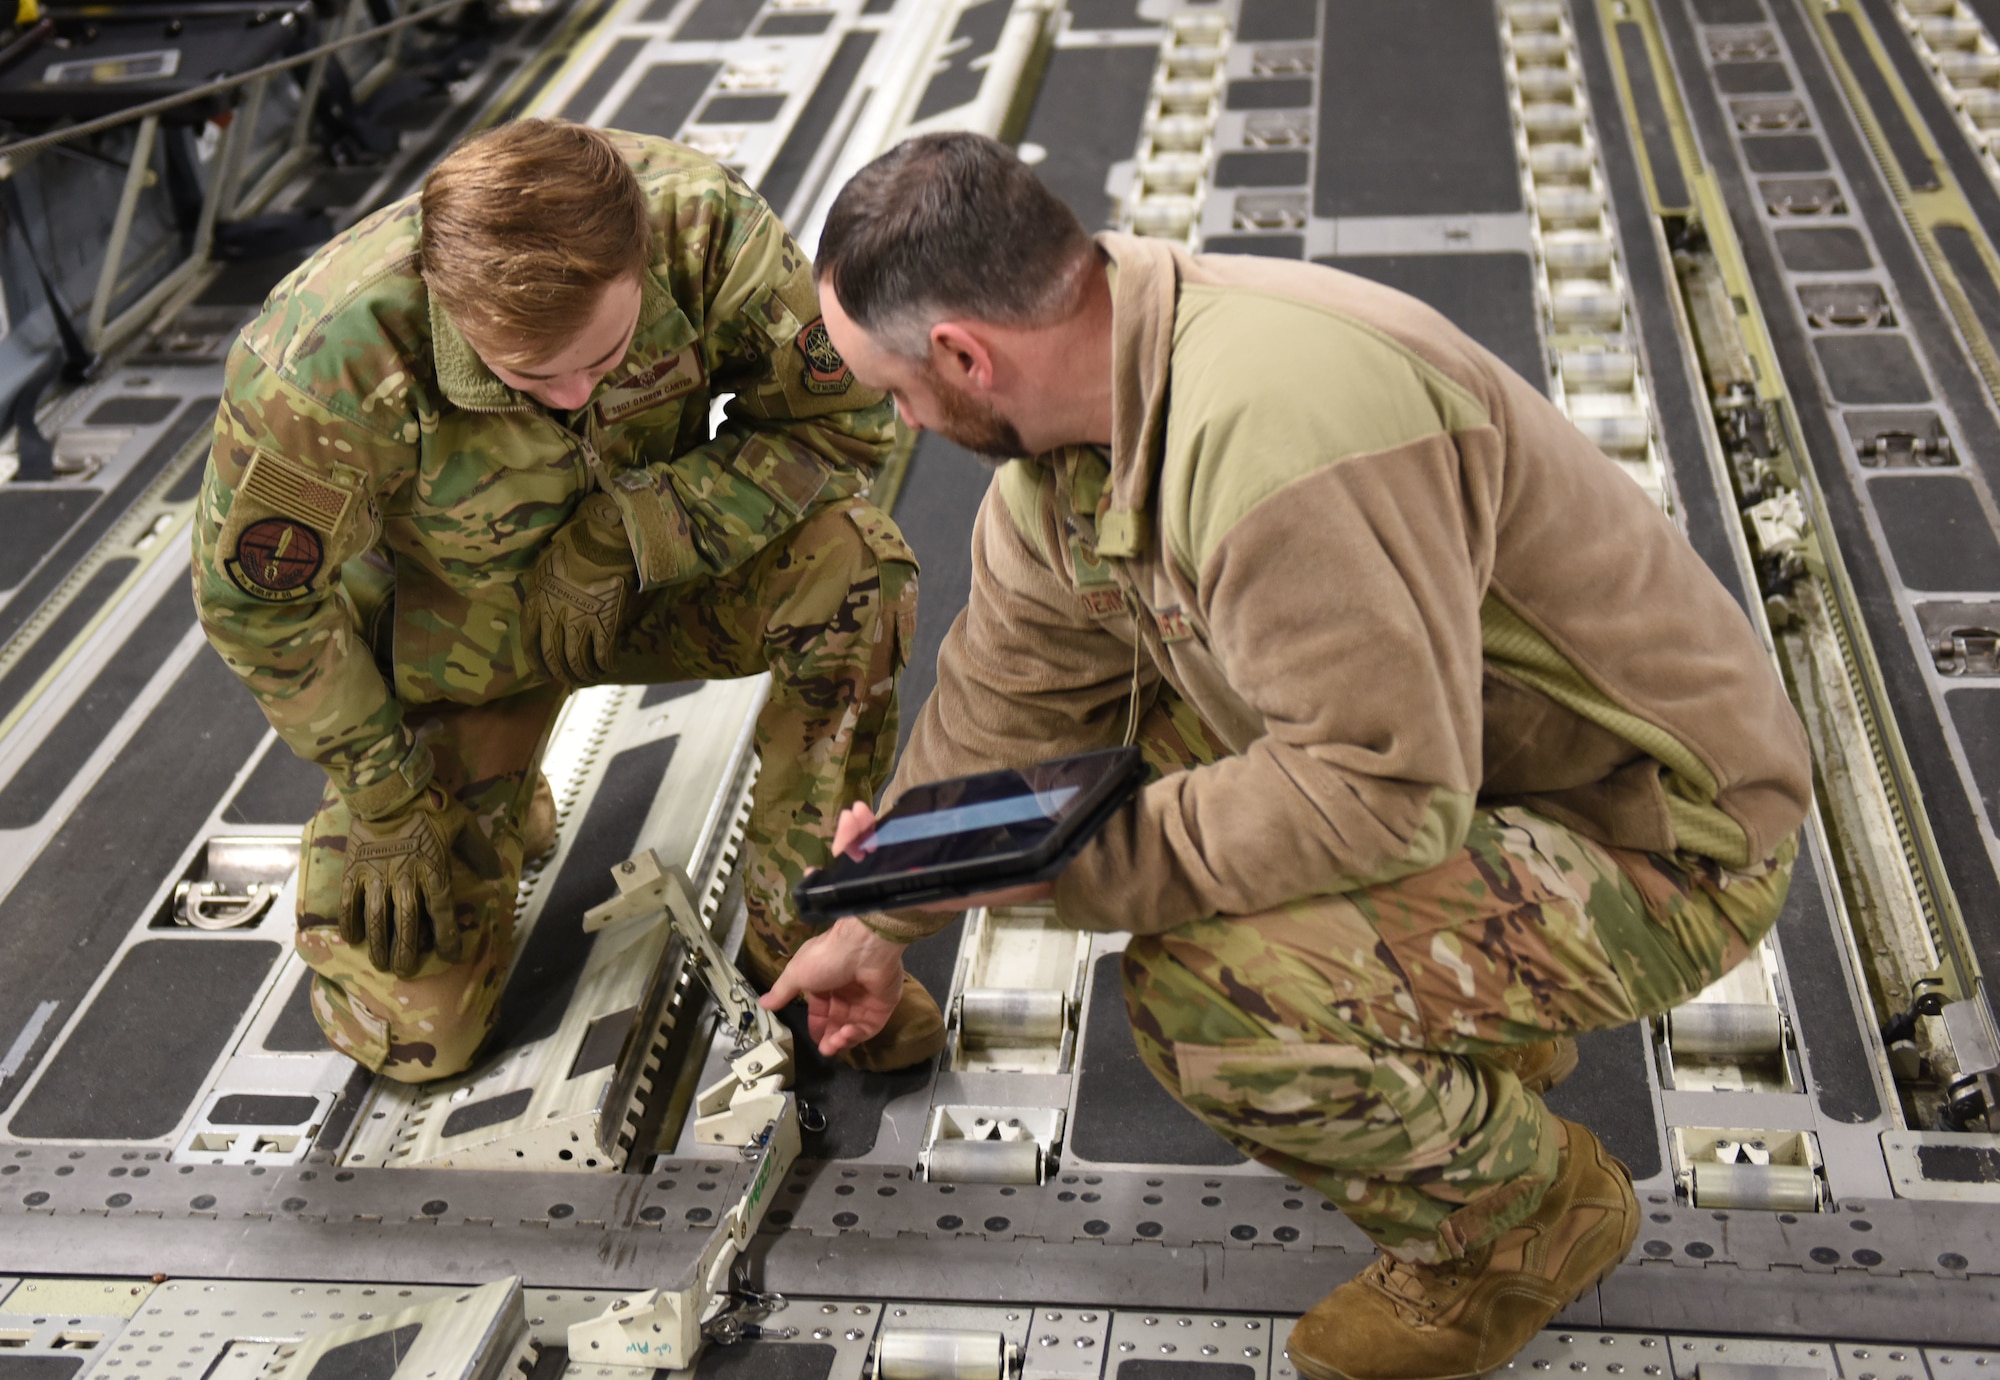 U.S. Air Force Master Sgt. Kent Koerner, right, 7th Airlift Squadron loadmaster superintendent, instructs Staff Sgt. Darren Carter, 7th AS loadmaster, on the proper technique for installing the aerial delivery system rail bridge assembly during loadmaster training for Exercise RED FLAG-Alaska 23-1 at Joint Base Elmendorf-Richardson, Alaska, Oct. 19, 2022.